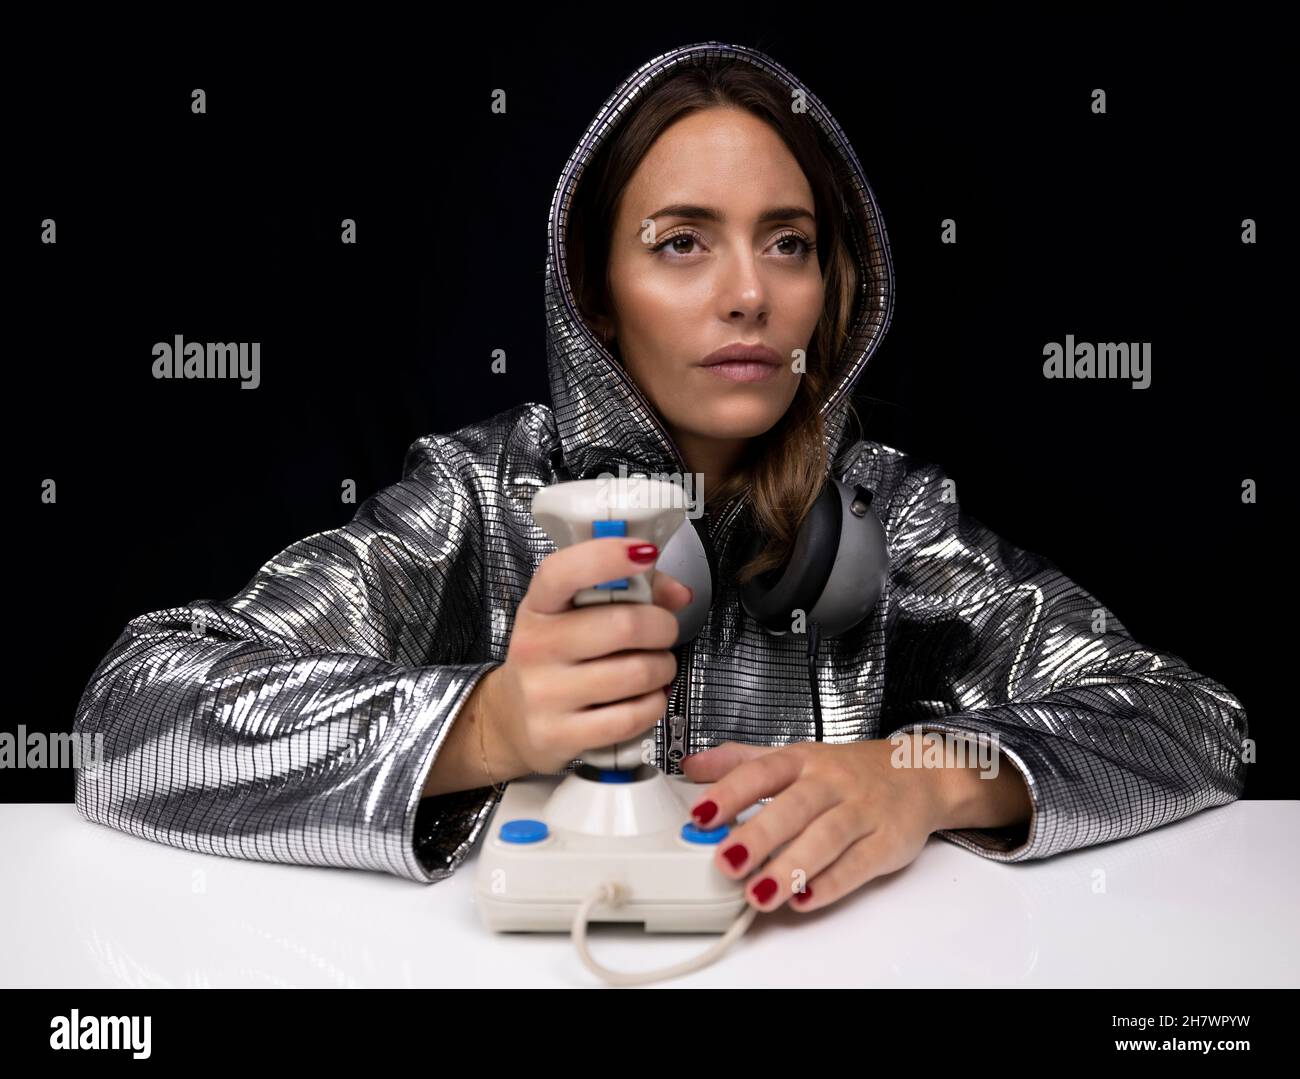 Woman with silver costume and computer joystick Stock Photo